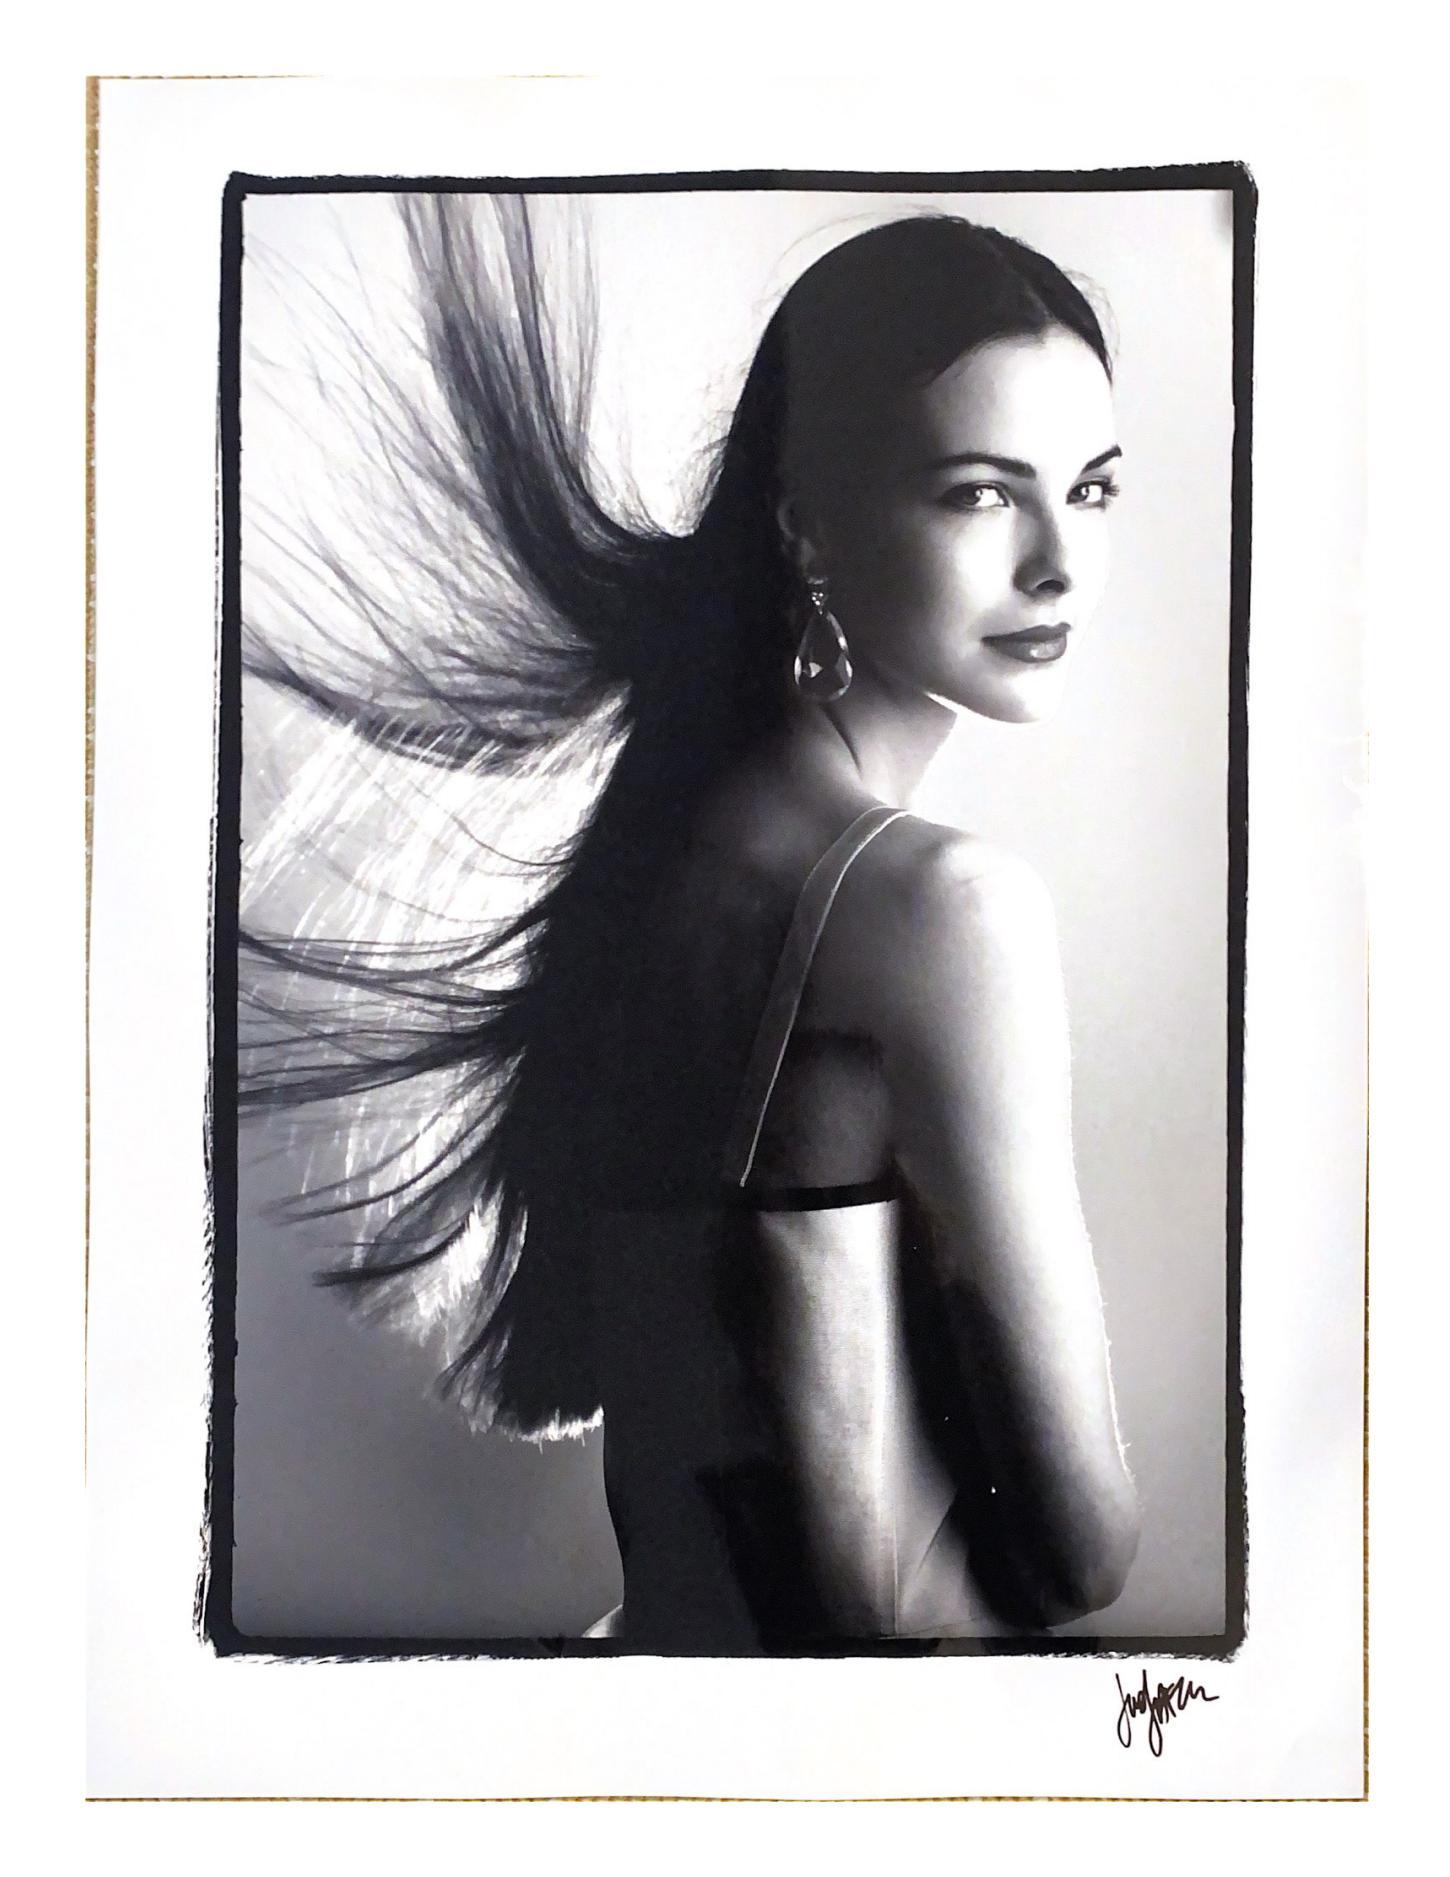 Carole Bouquet by Just Jaeckin
signed and numbered 21/100 lower left 
print on glossy paper 
excellent condition
Circa of the print : 2009 
Size : 80 x 60 cm 
Price : 990 € for the print.